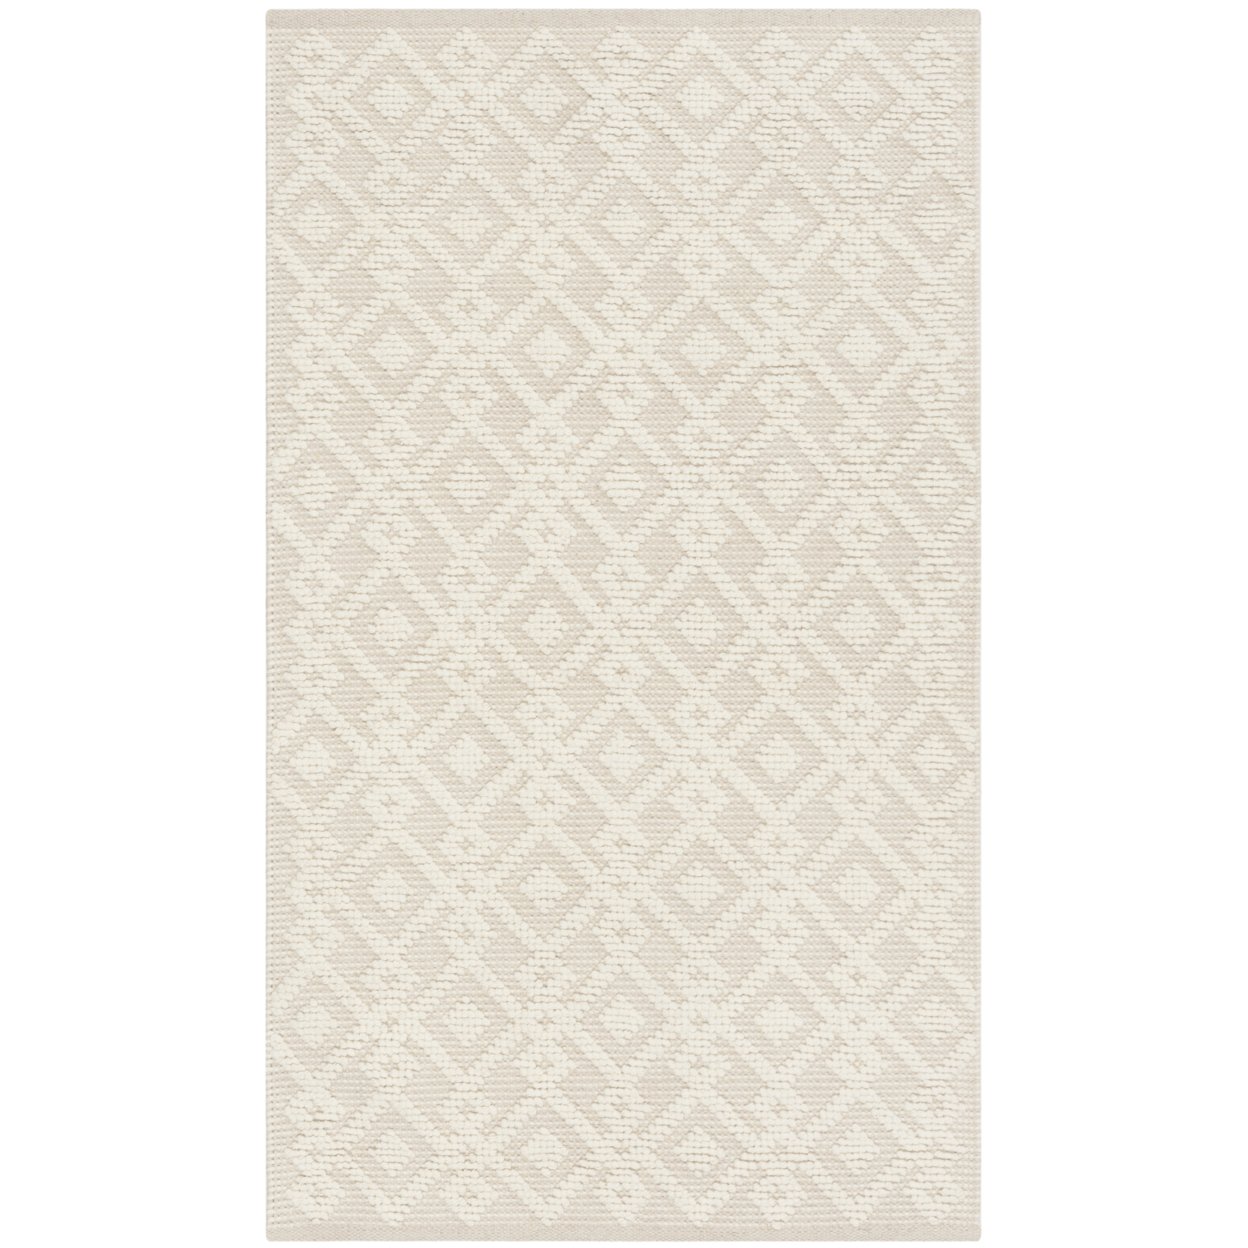 SAFAVIEH Vermont Collection VRM102A Handwoven Ivory Rug - 4 X 6